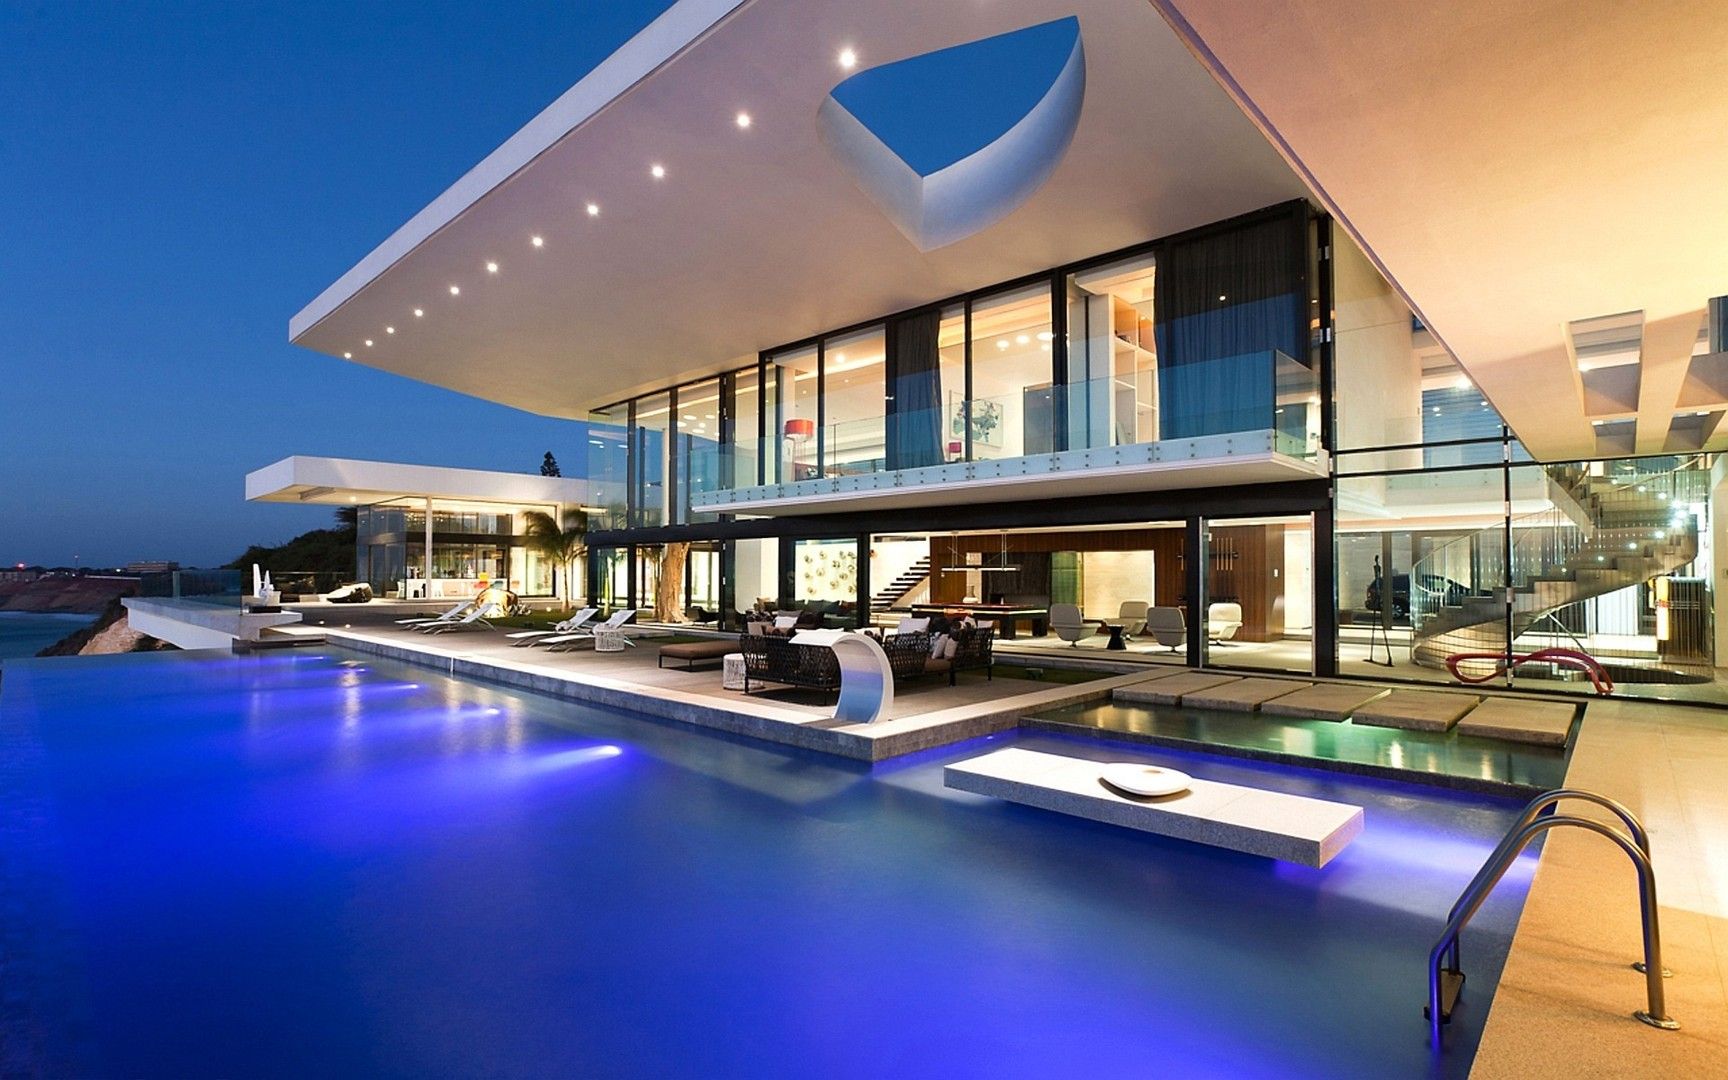 Download Modern house with a pool wallpaper 1862 - Awesome Rock House Wallpaper